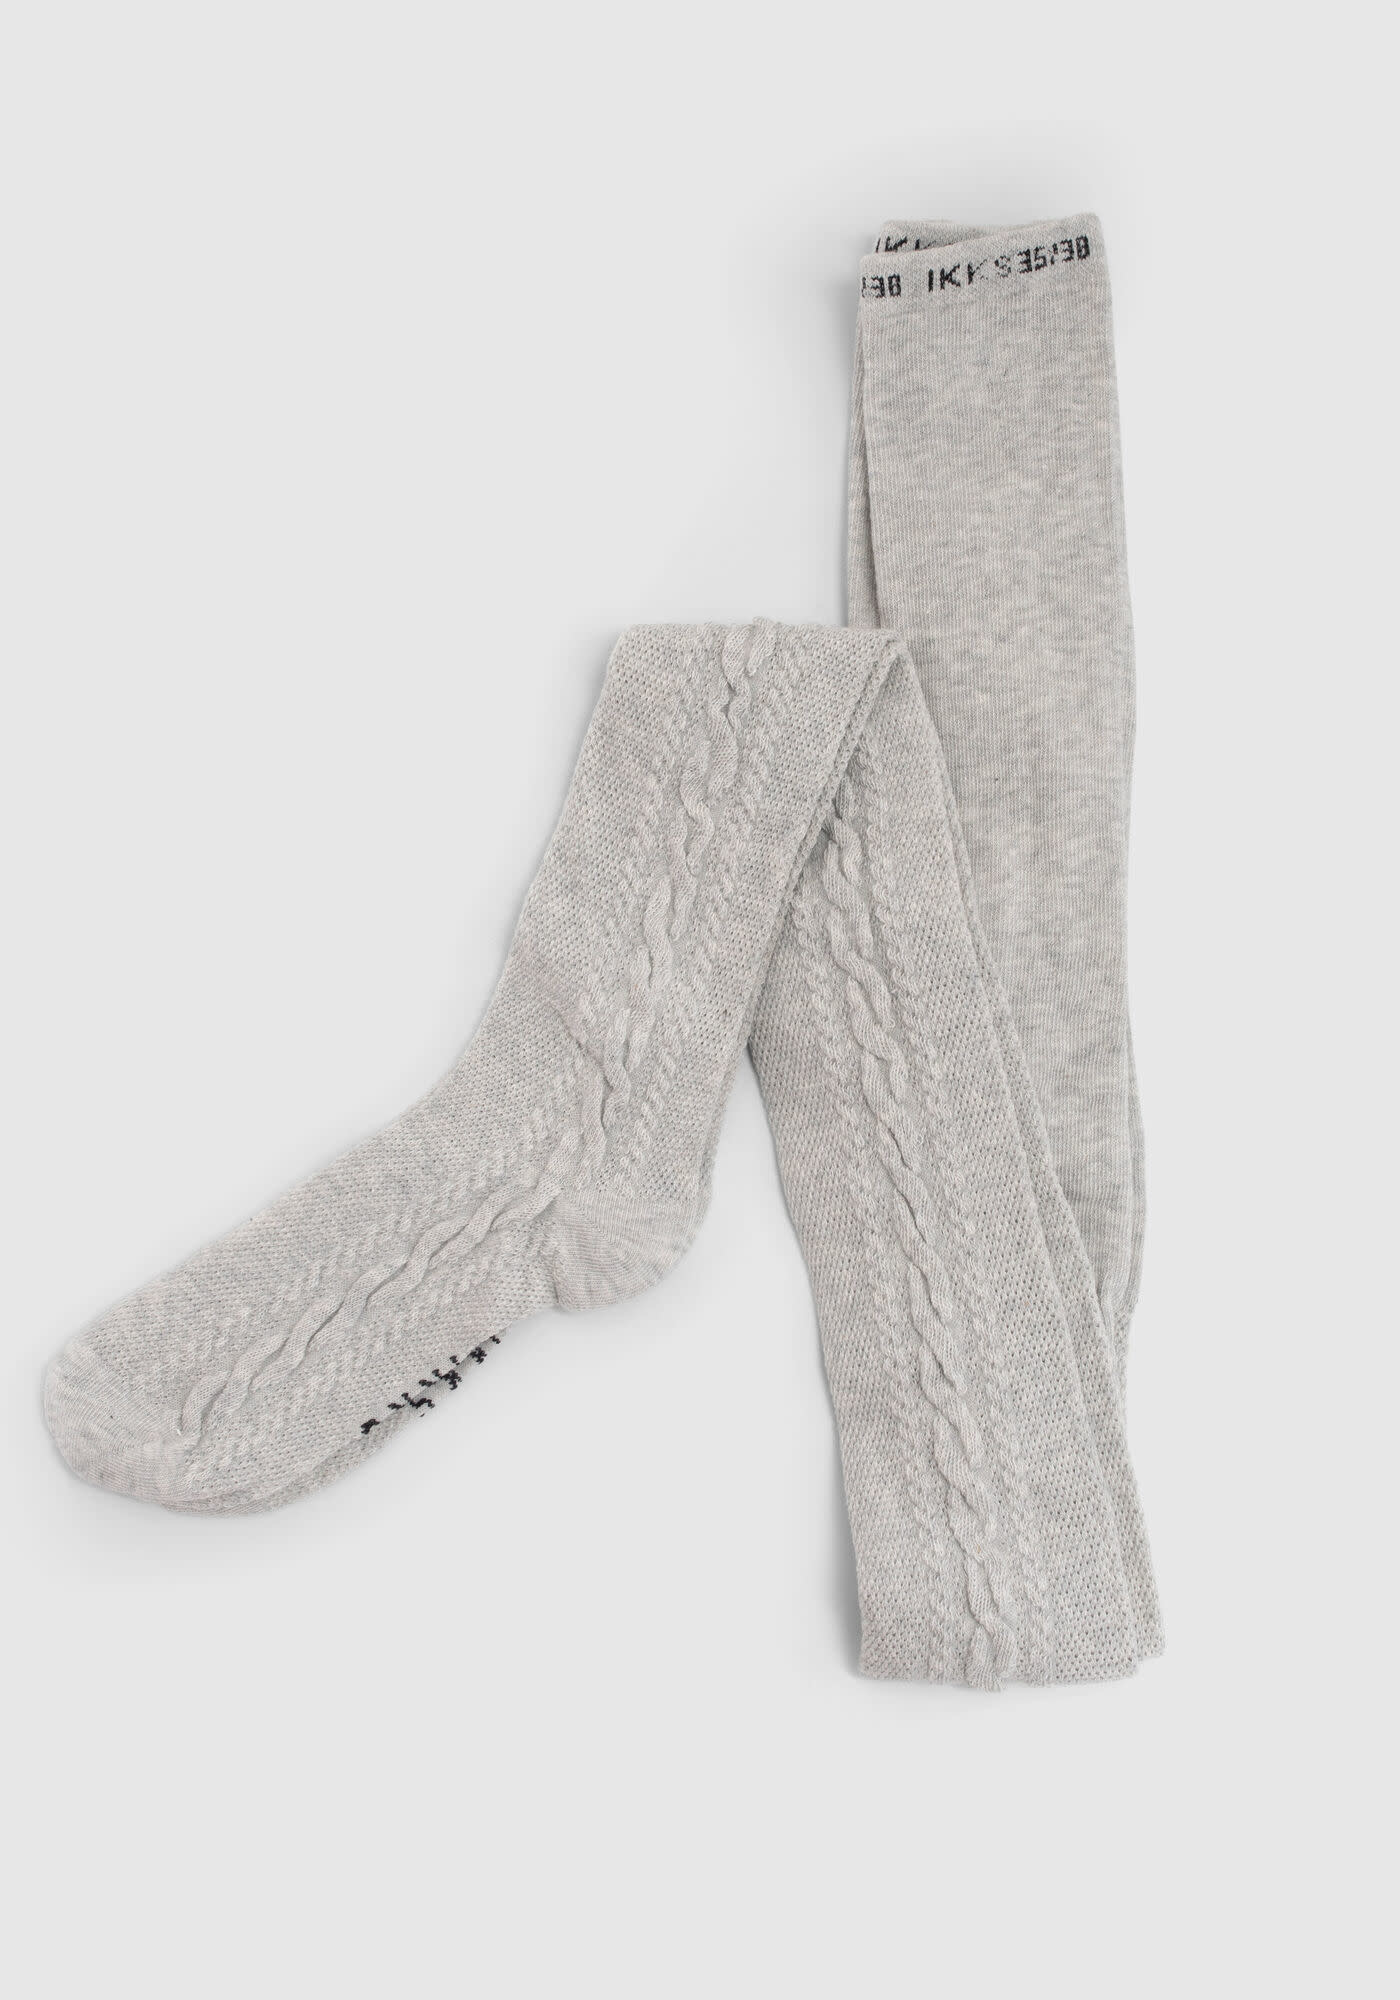 GIRLS' GREY MARL KNIT TIGHTS WITH CABLE KNIT DOWN LEGS